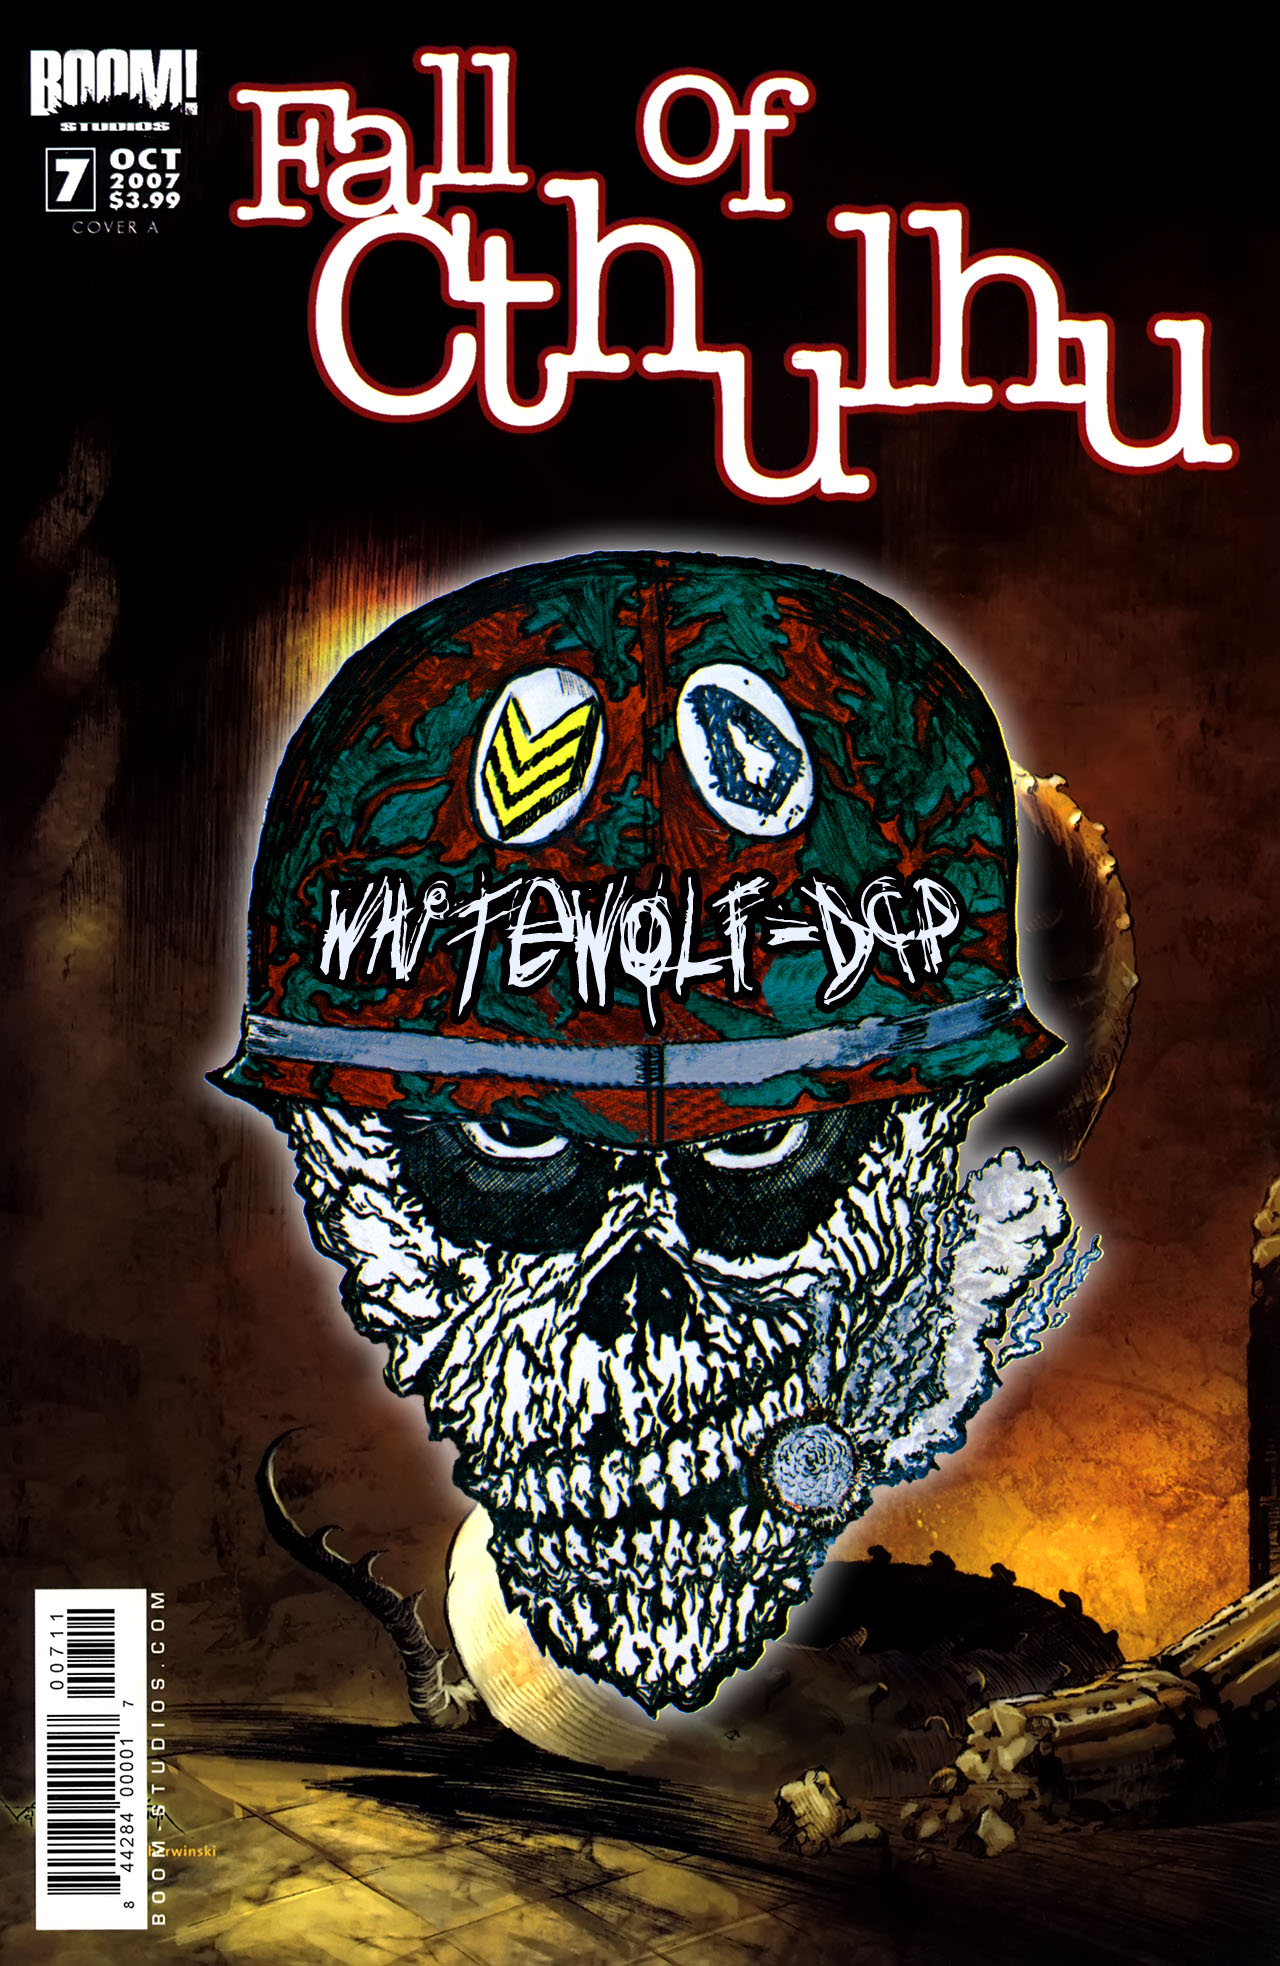 Read online Fall of Cthulhu comic -  Issue #7 - 25